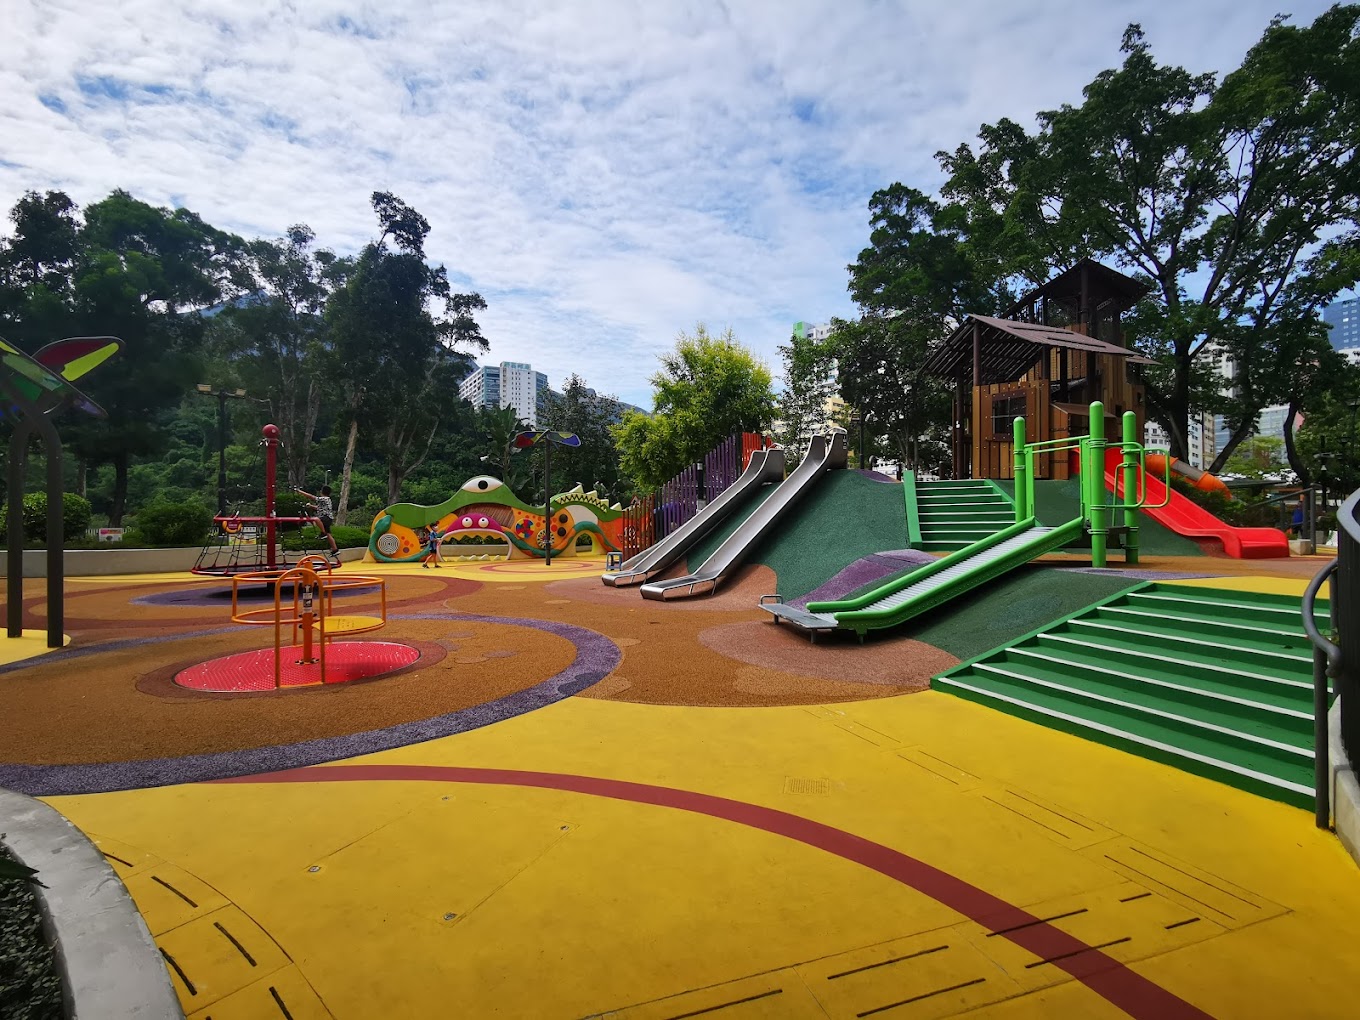 the barrier-free playground at tuen mun park. there ate slides, ramps, spinning equipment, and a rope tower, among other facilities.